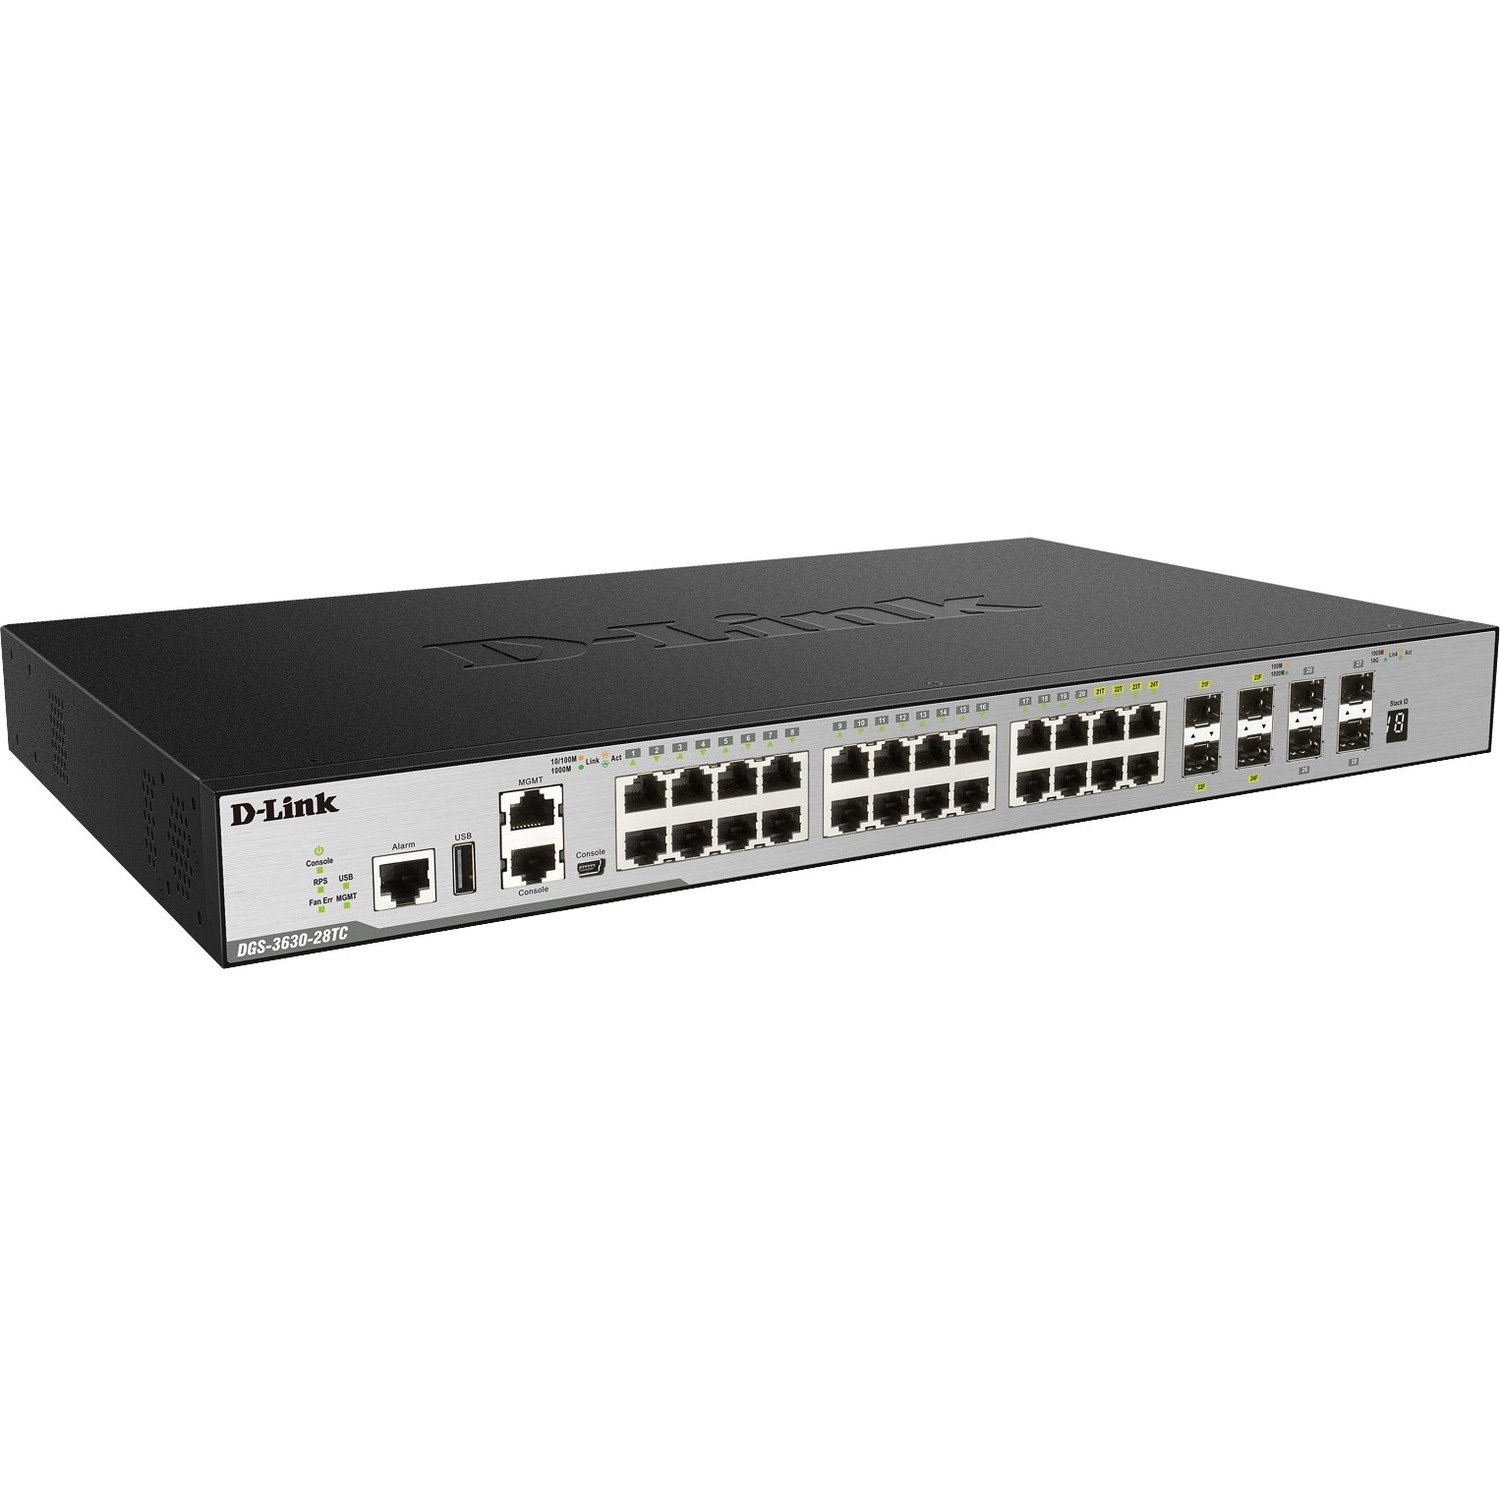 D-Link 28-Port Layer 3 Stackable Managed Gigabit Switch including 4 10GbE Ports